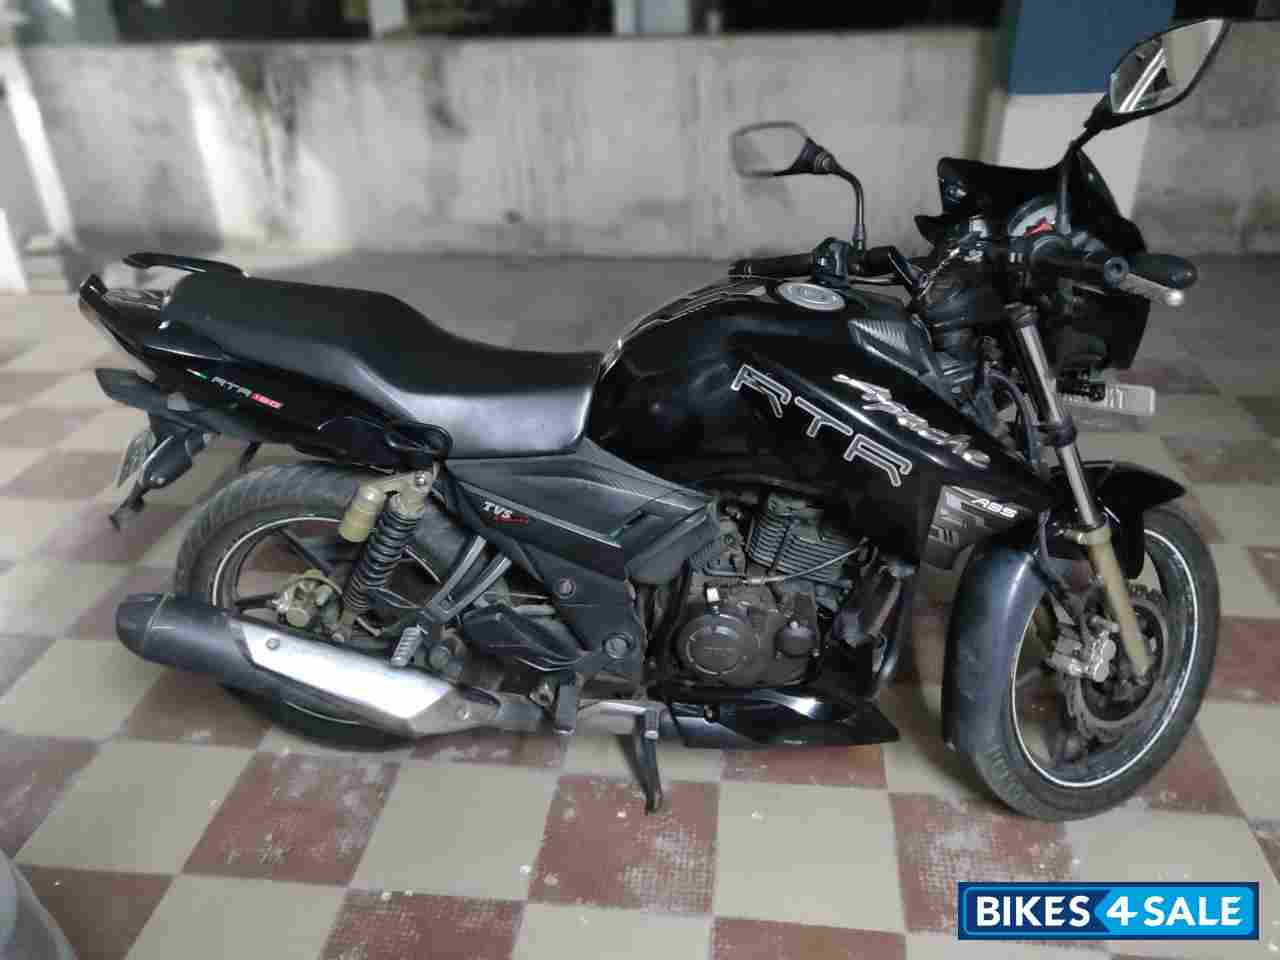 Used 2012 model TVS Apache RTR 180 ABS for sale in Chennai ...